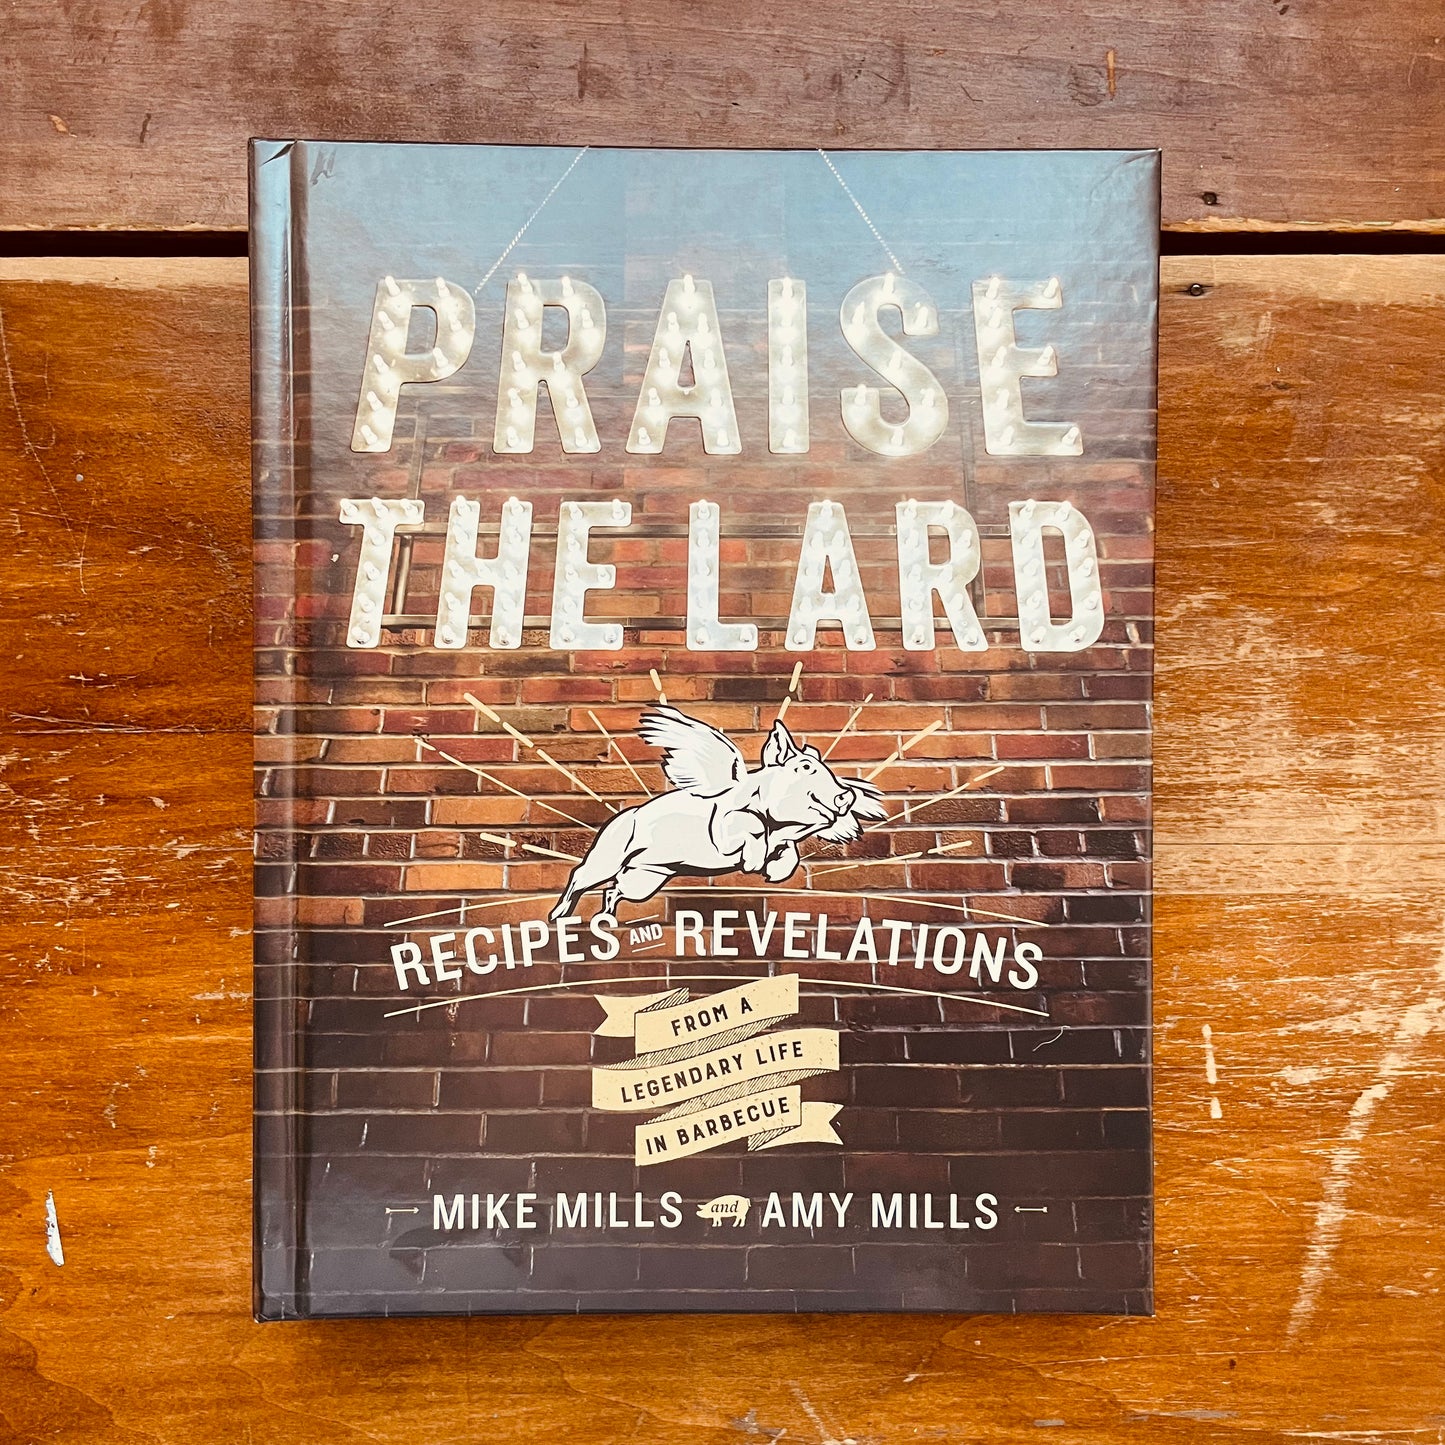 Praise the Lard: Recipes and Revelations from a Legendary Life in Barbecue